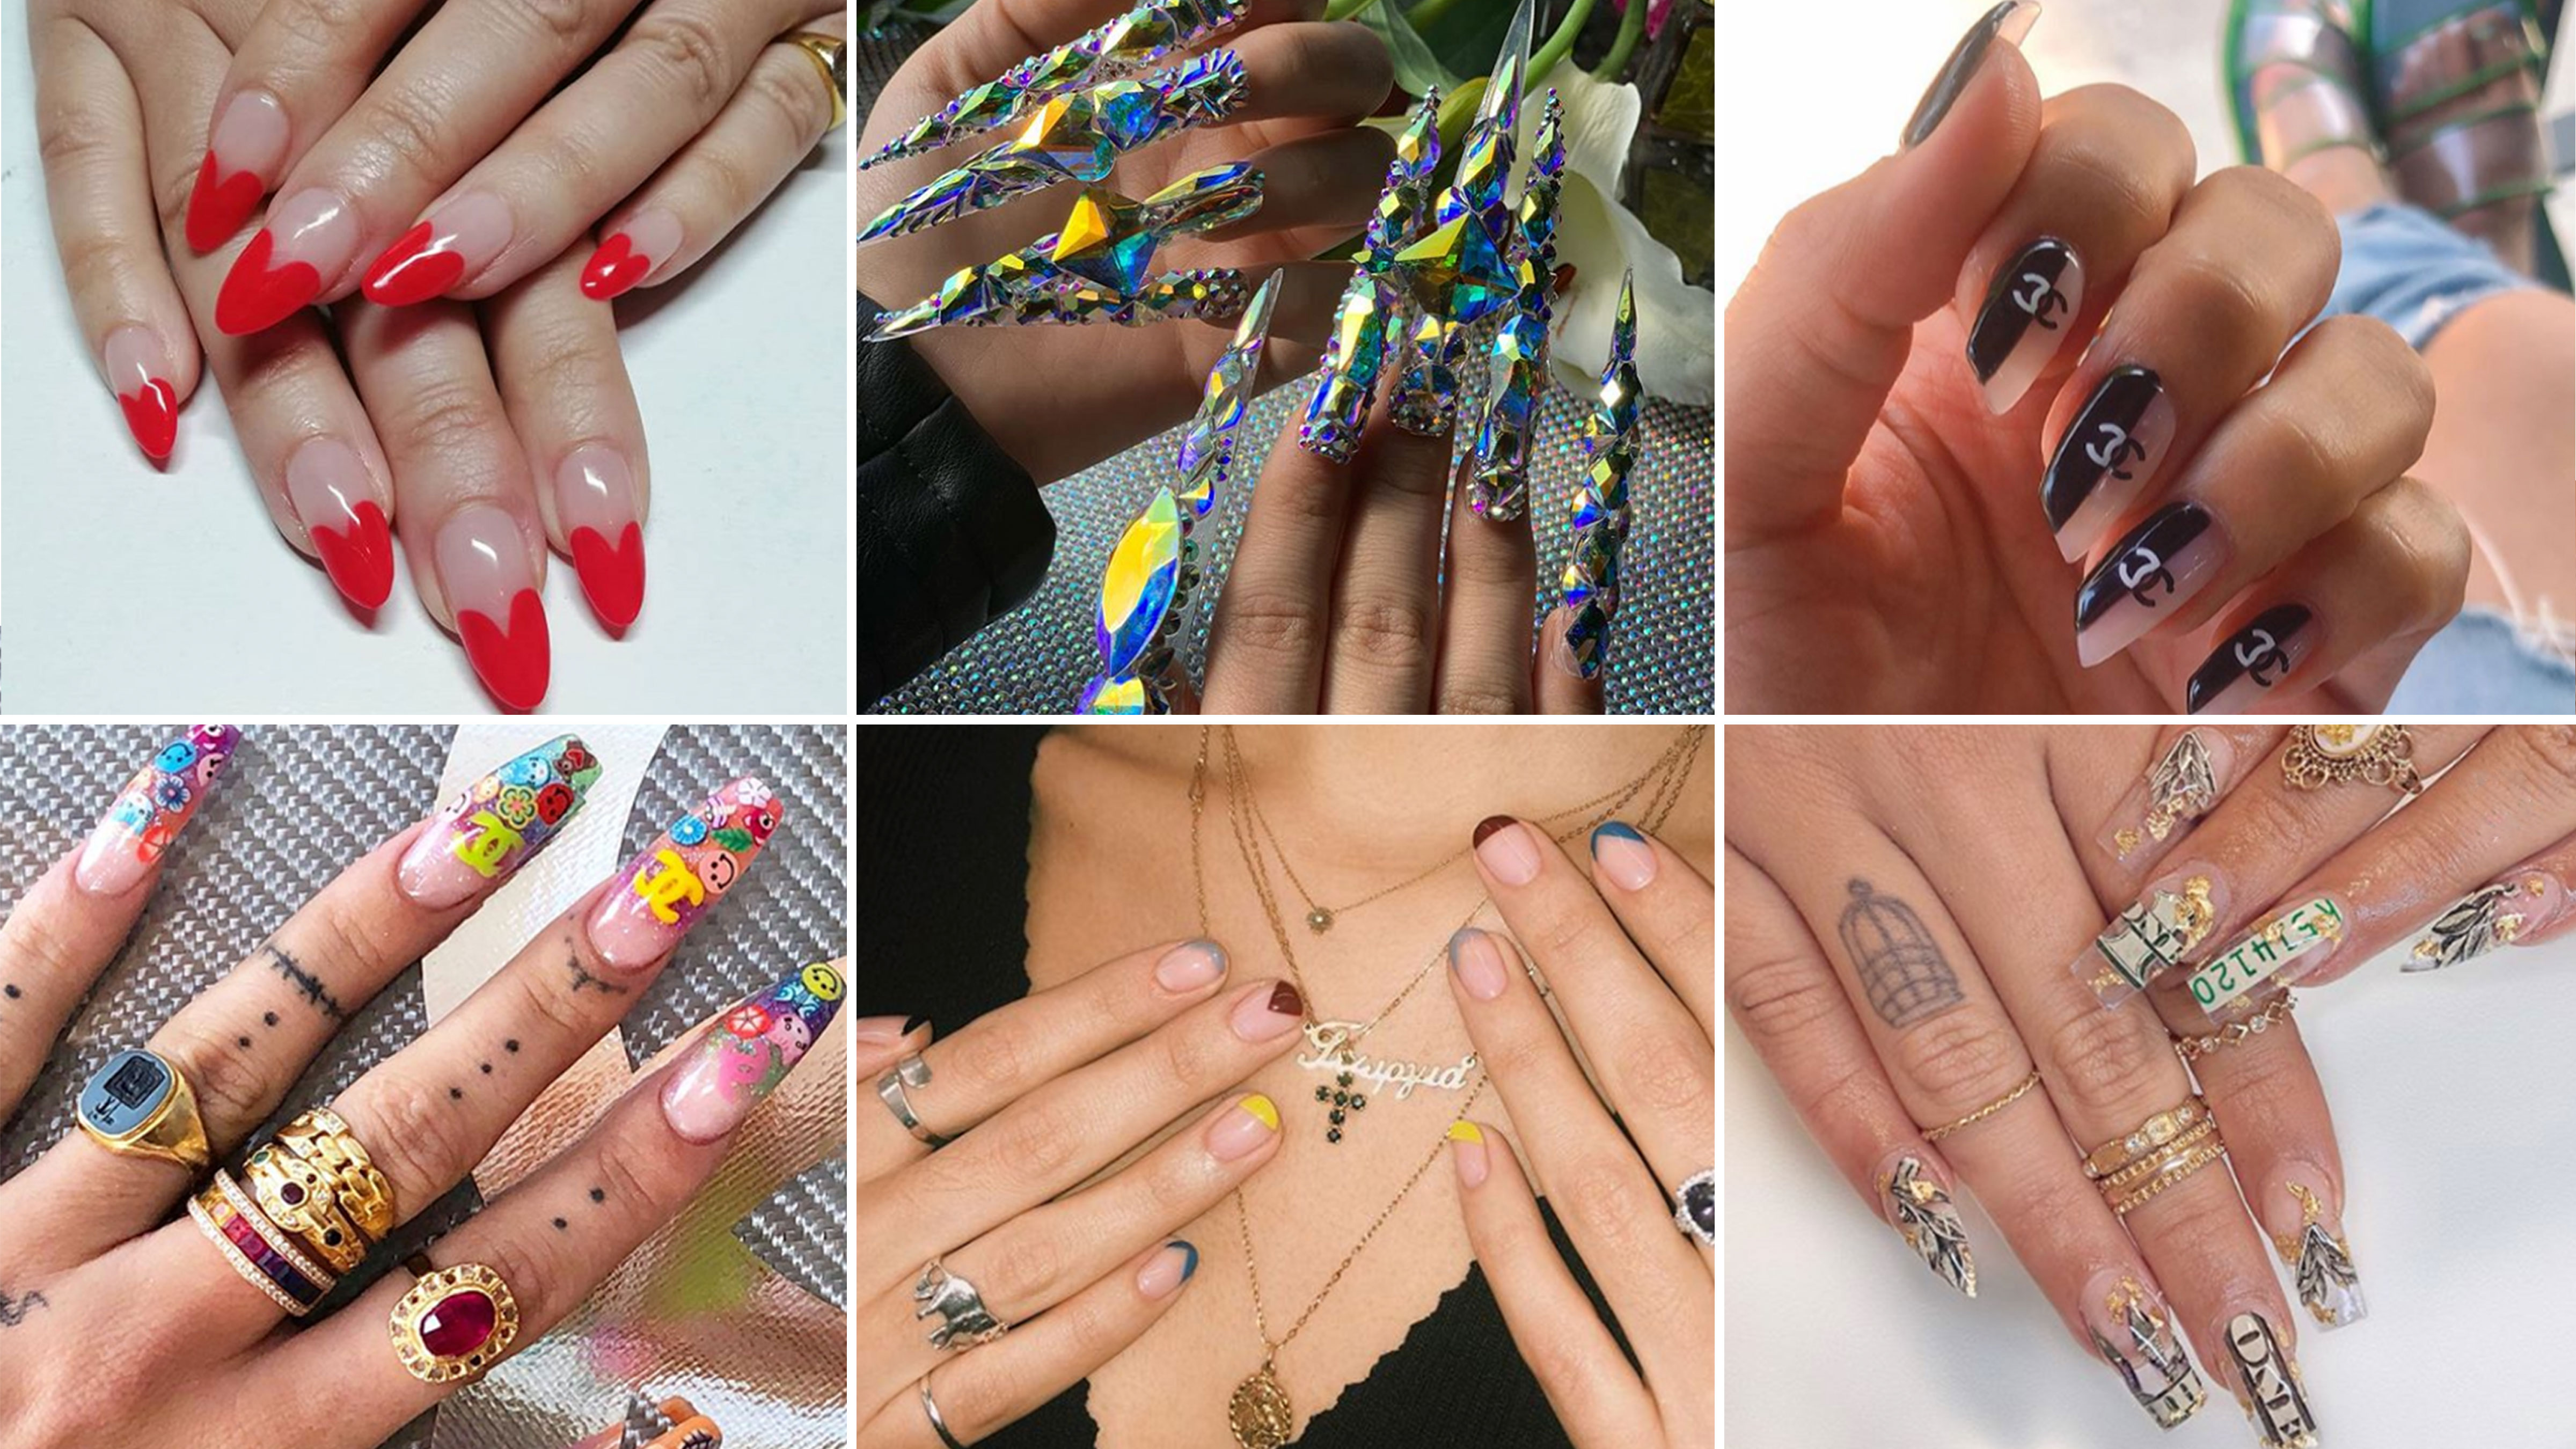 The Best Nail Art Instagram Influencers to Follow For Manicure Inspo